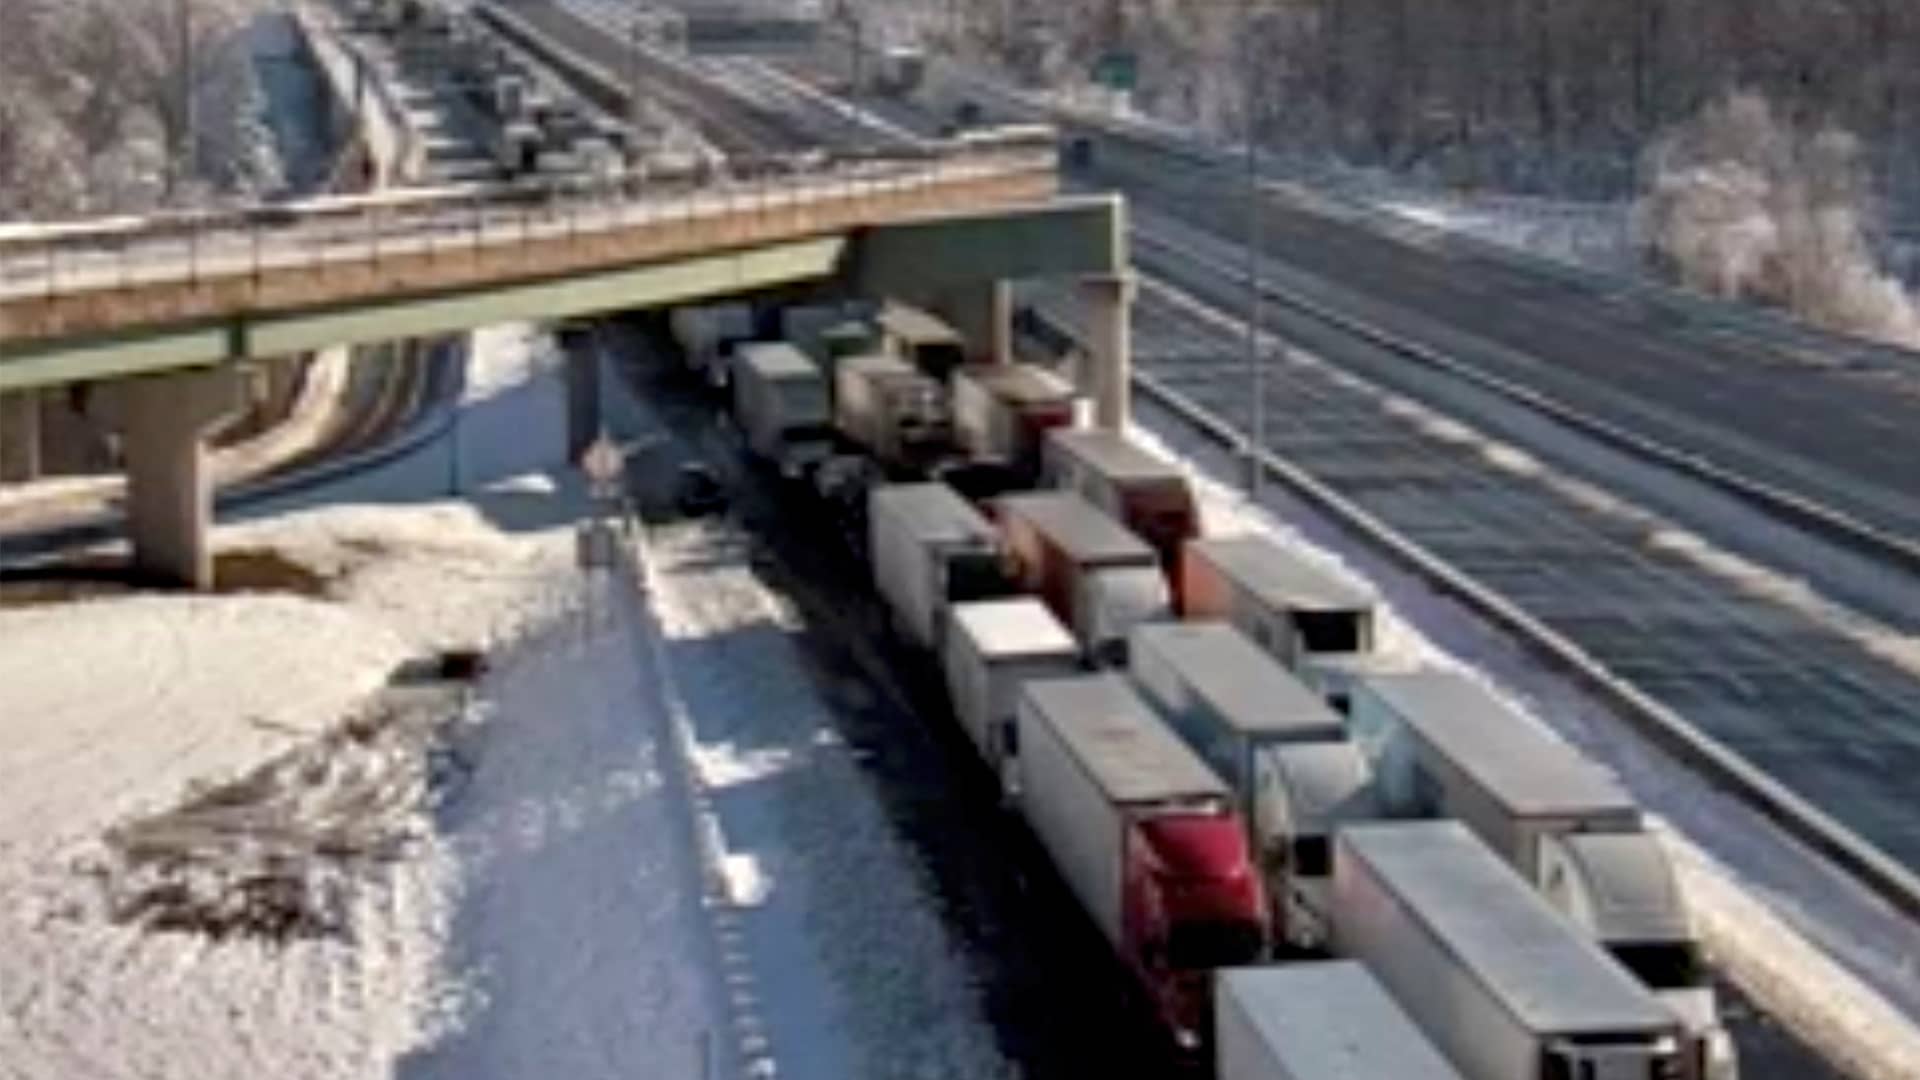 Stranded vehicles are seen in still image from highway traffic camera video as authorities worked to reopen an icy stretch of Interstate 95 closed after a storm blanketed the U.S. region in snow a day earlier, near Colchester, Virginia, January 4, 2022.